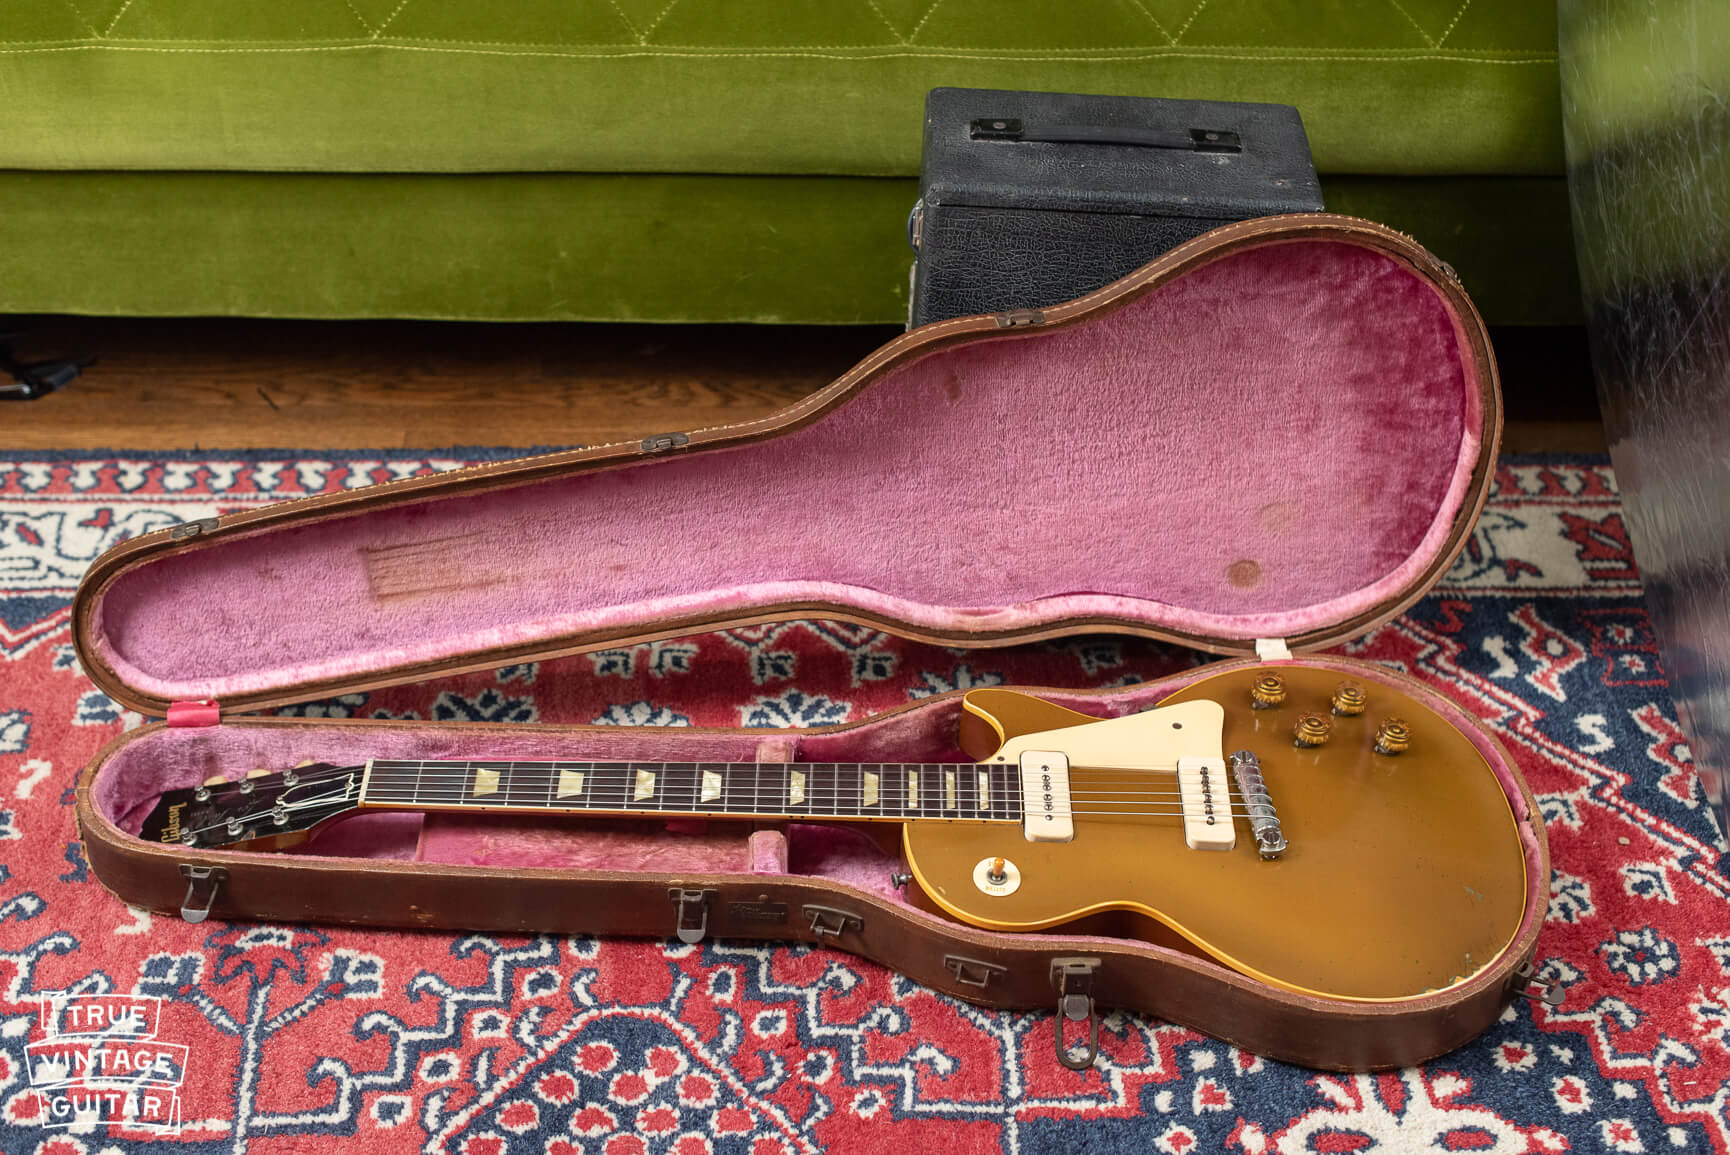 Gibson Les Paul 1954 goldtop vintage guitar in original pink and brown Lifton hard shell case